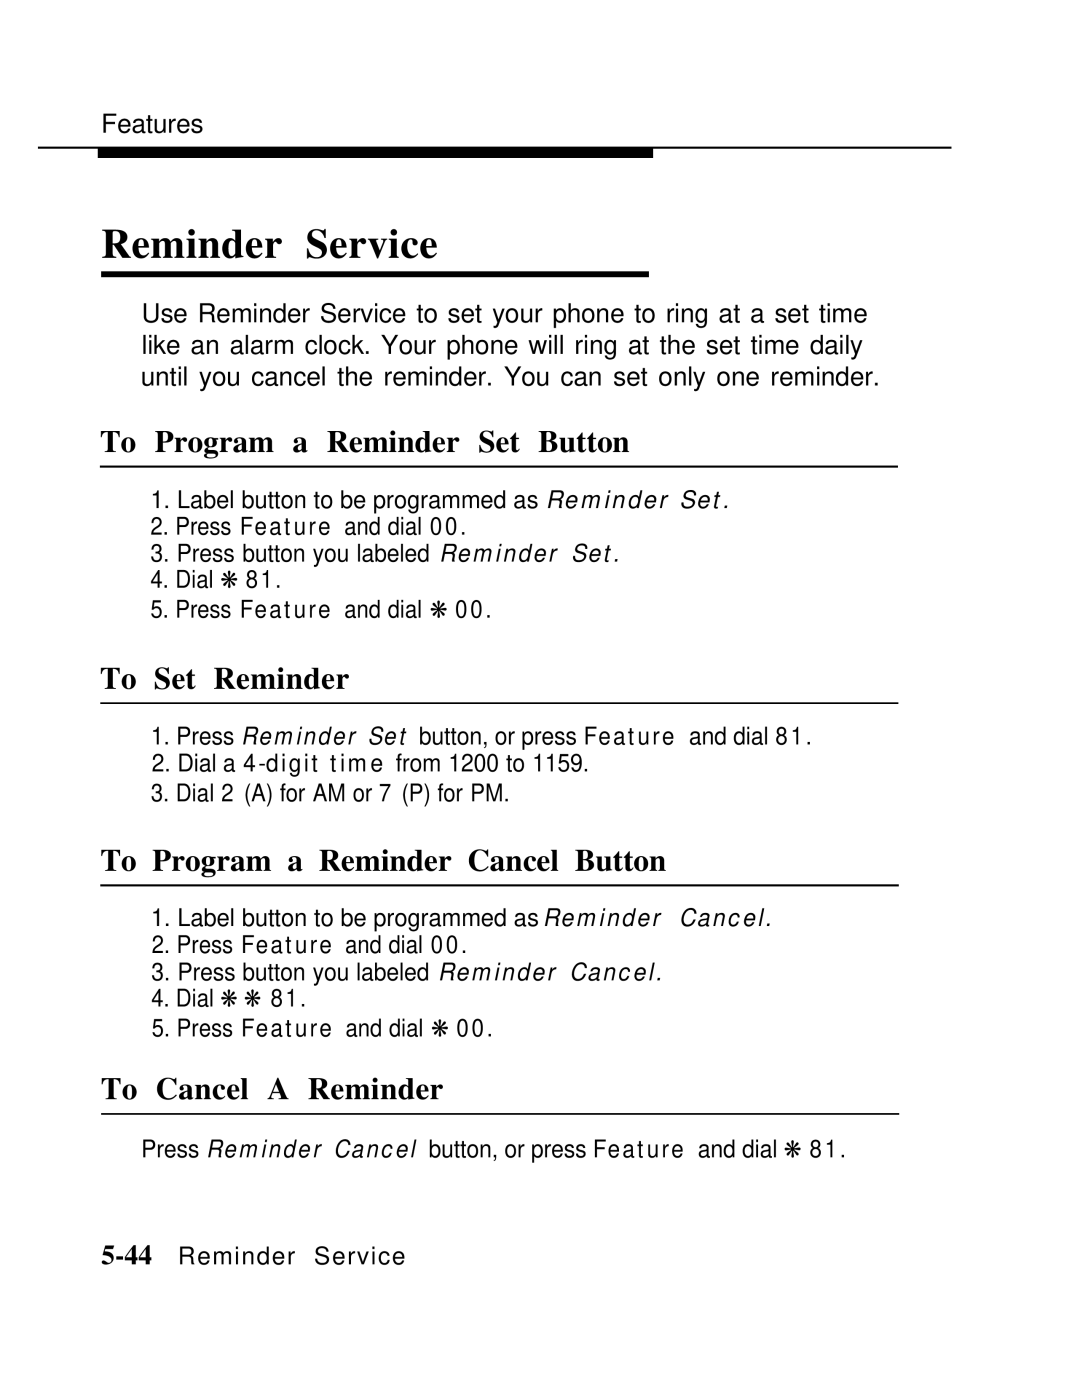 AT&T MLX-10 manual Reminder Service, To Program a Reminder Set Button, To Set Reminder, To Program a Reminder Cancel Button 